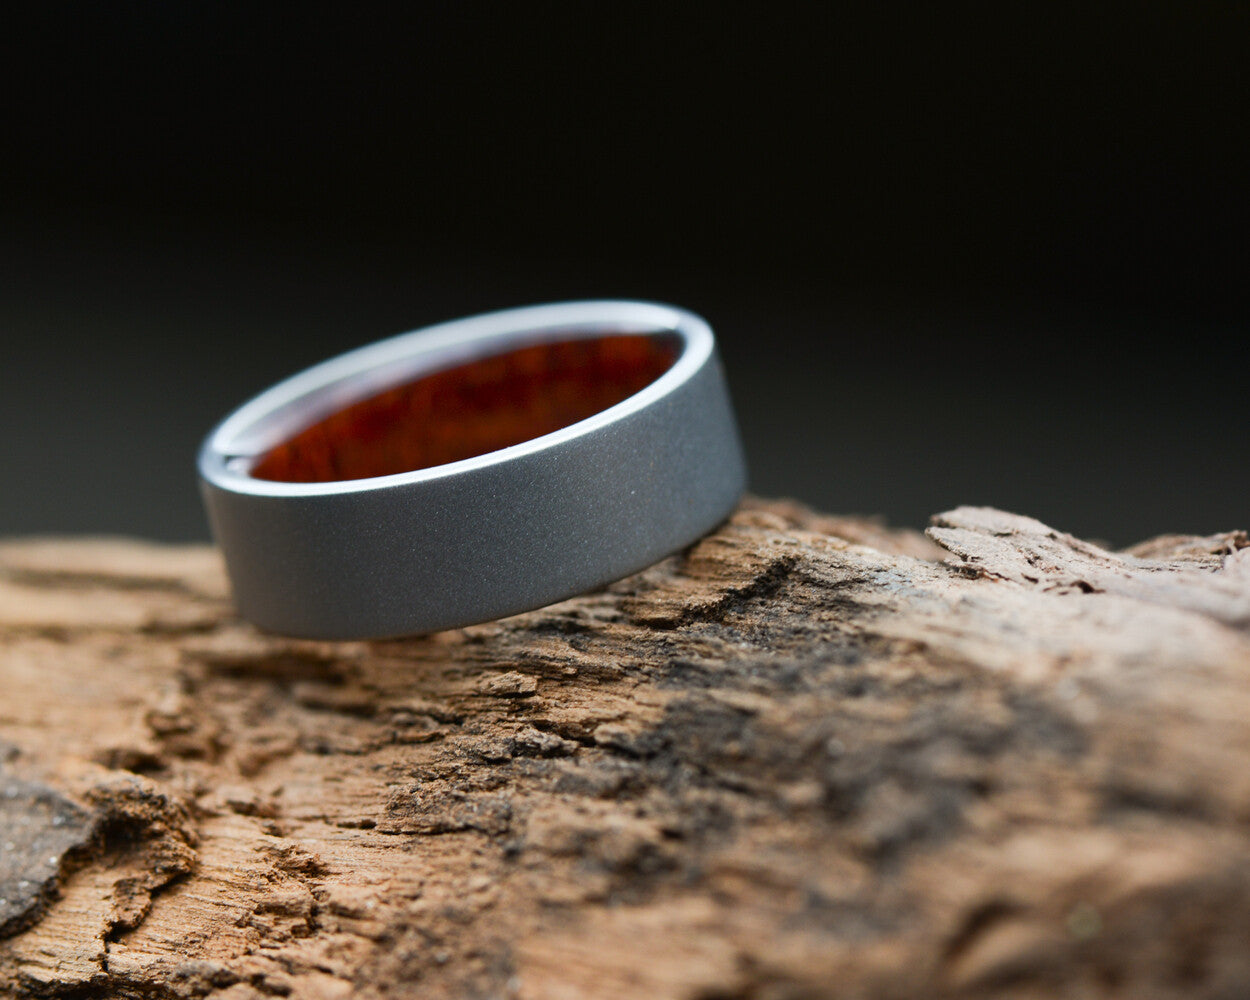 Custom Metal Ring with Wooden Interior | Personalized Material | Crafted with Meaning & Story